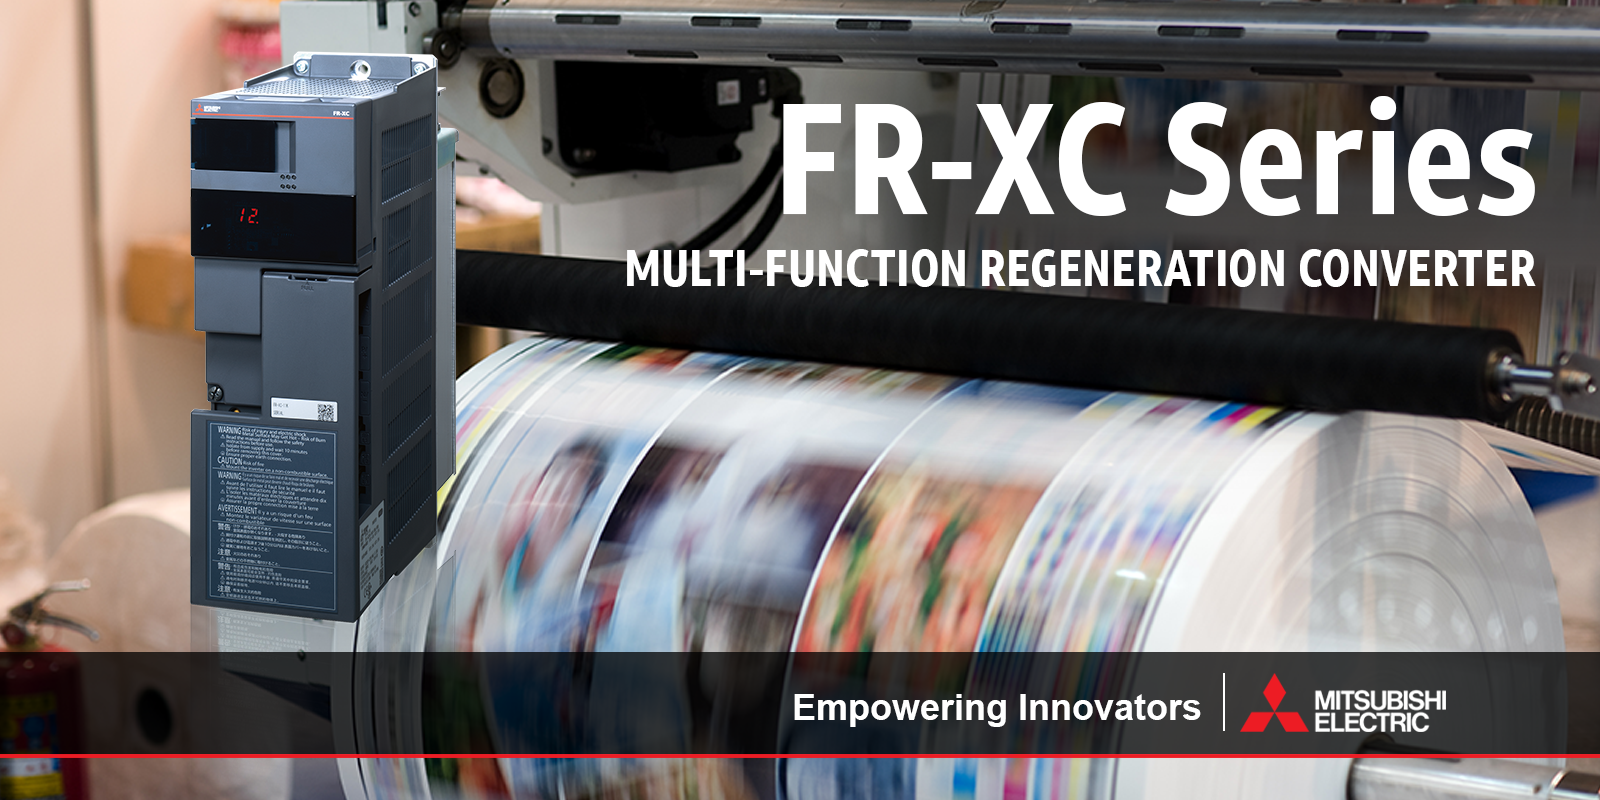 FR-XC Series Overview | Mitsubishi Electric Americas